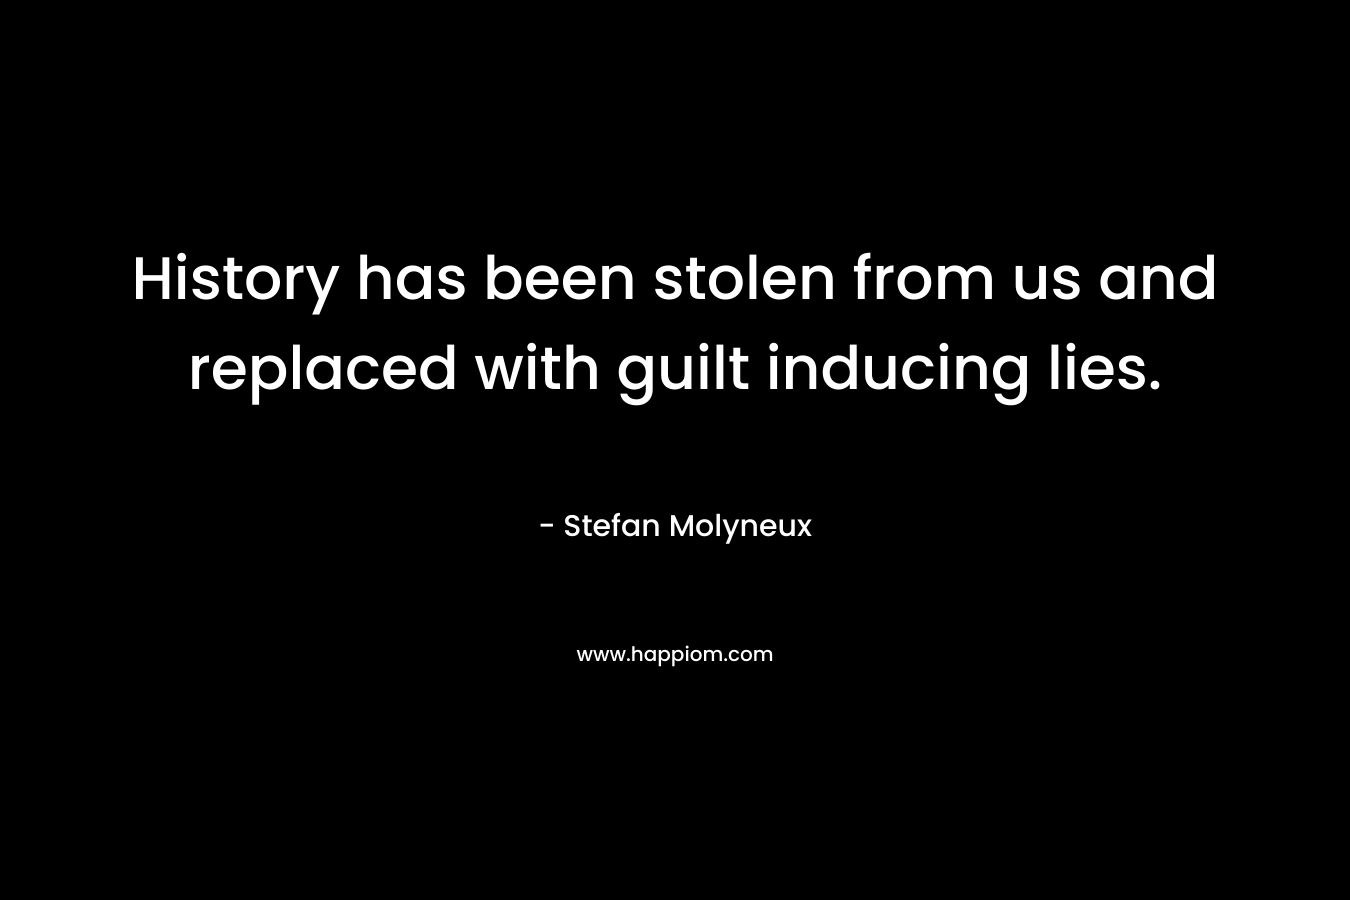 History has been stolen from us and replaced with guilt inducing lies. – Stefan Molyneux